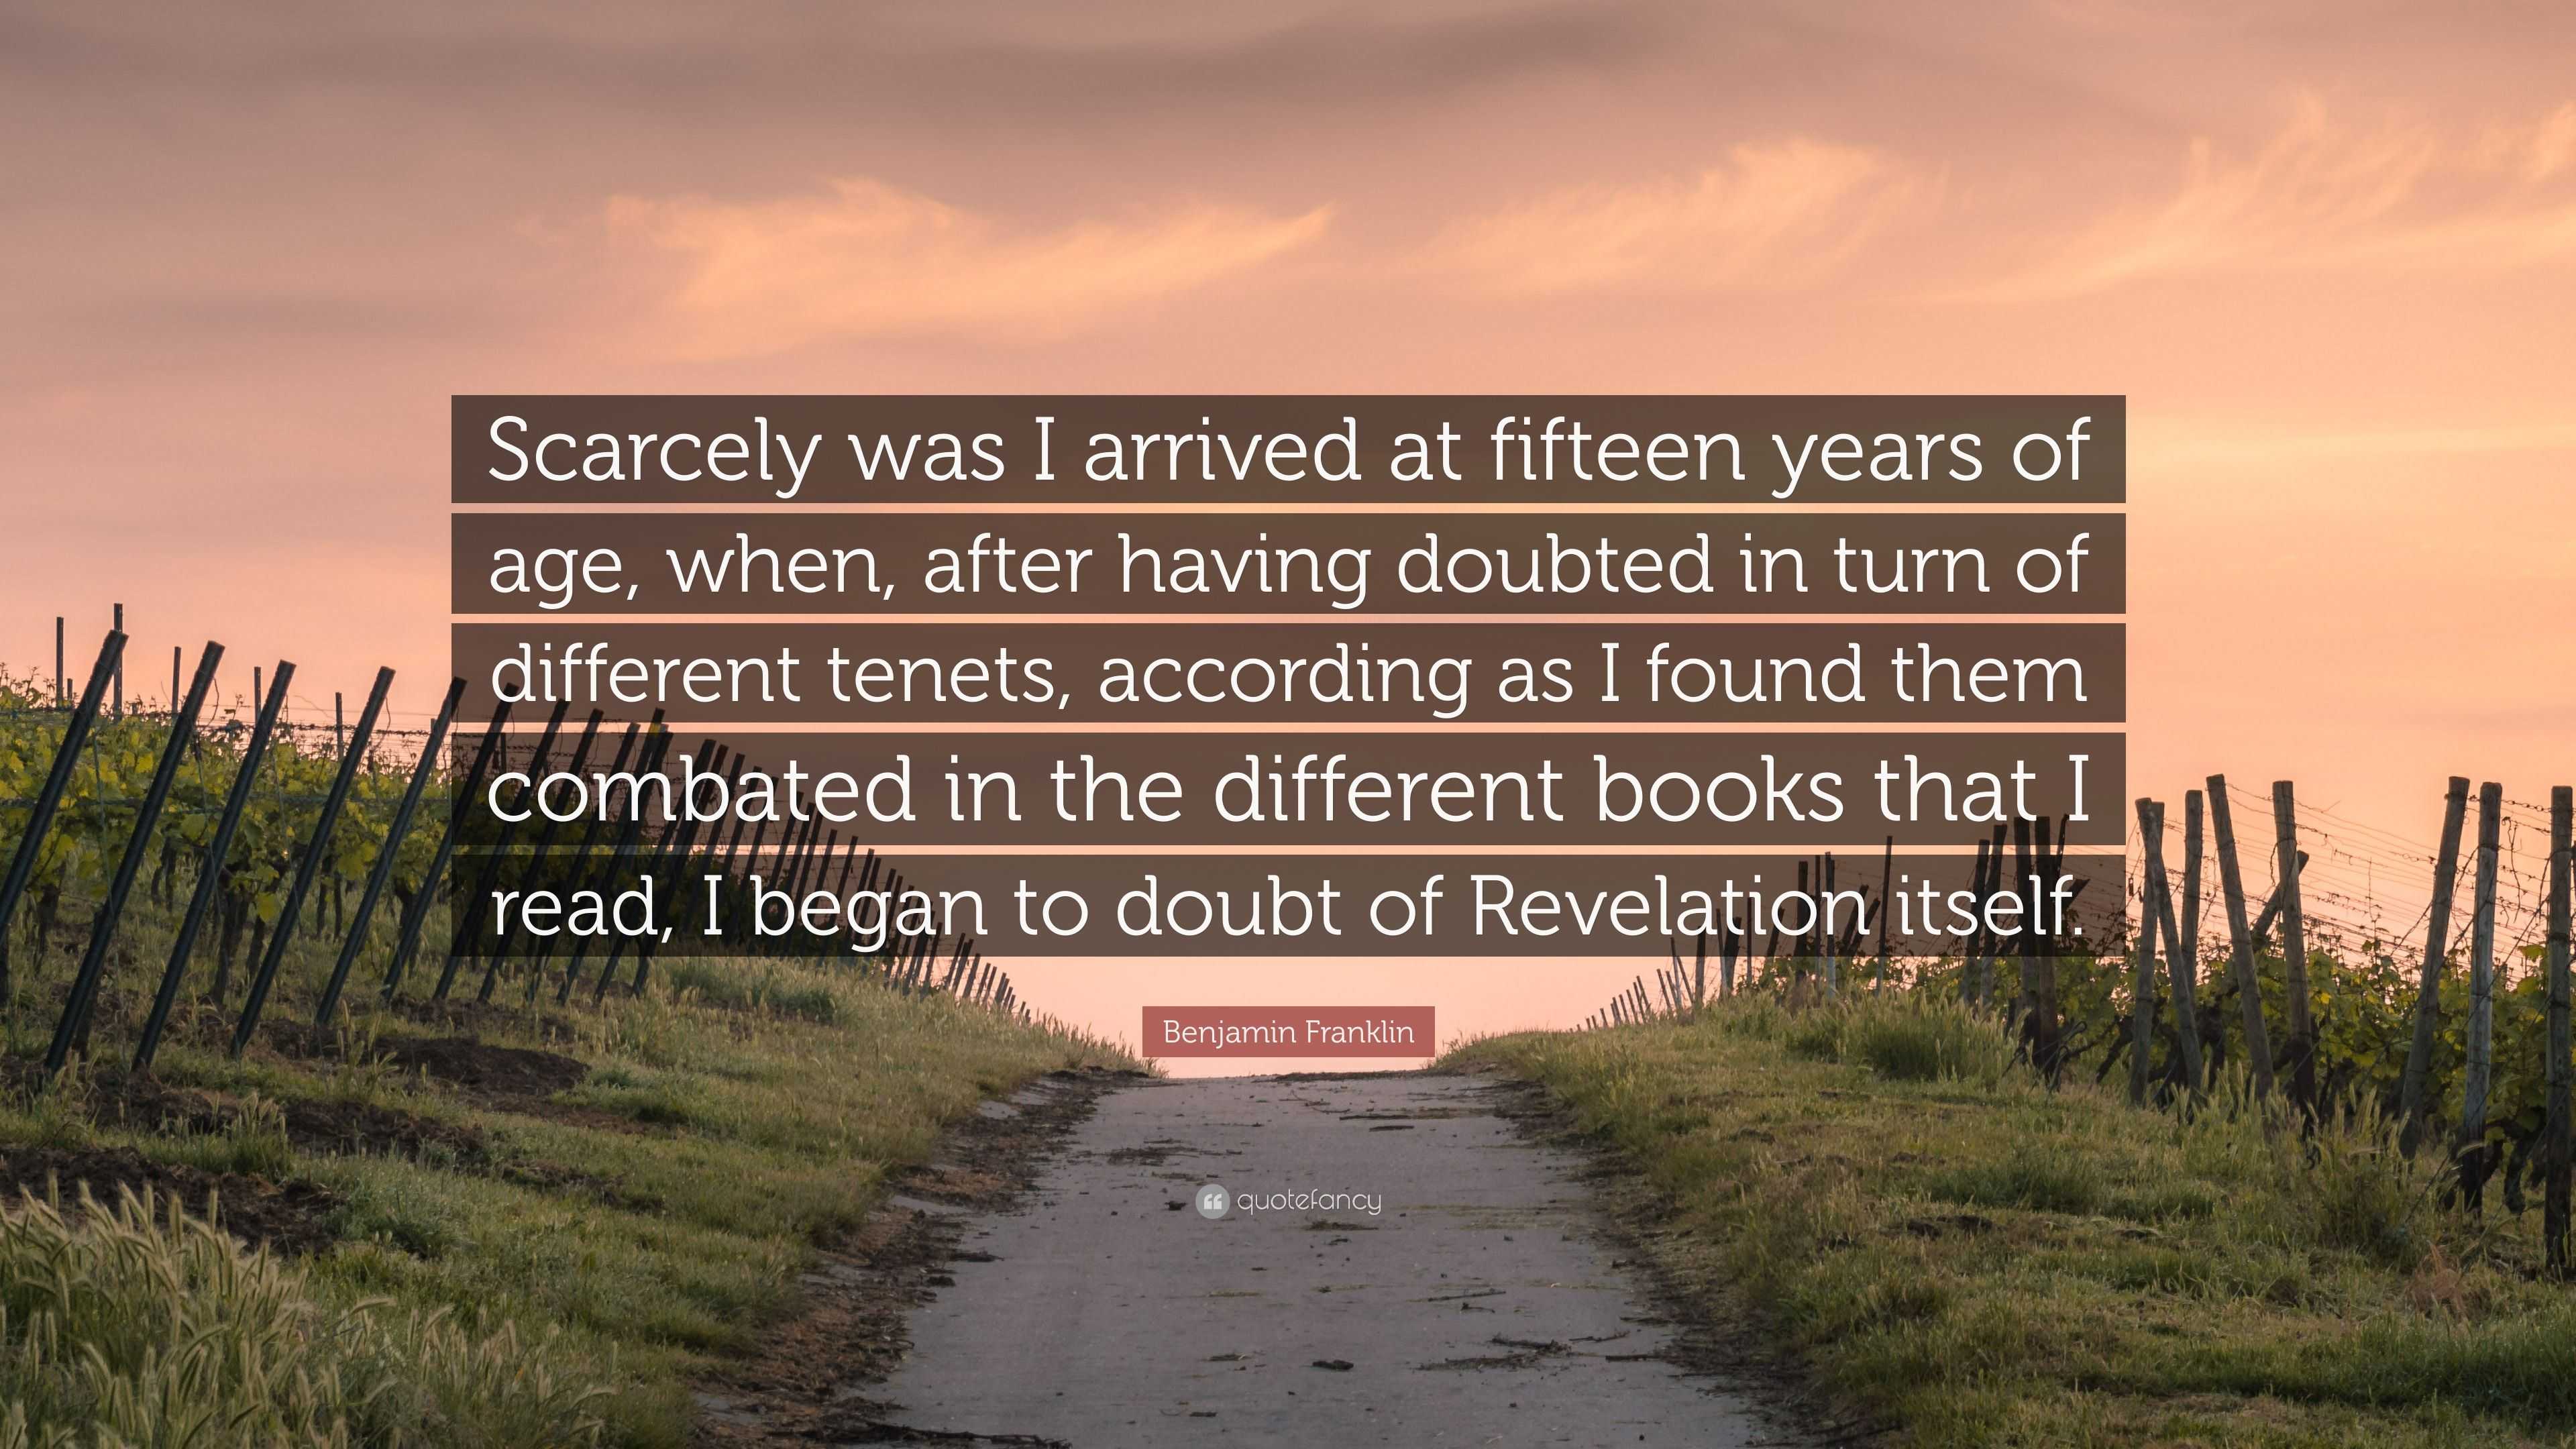 Benjamin Franklin Quote: “Scarcely was I arrived at fifteen years of ...